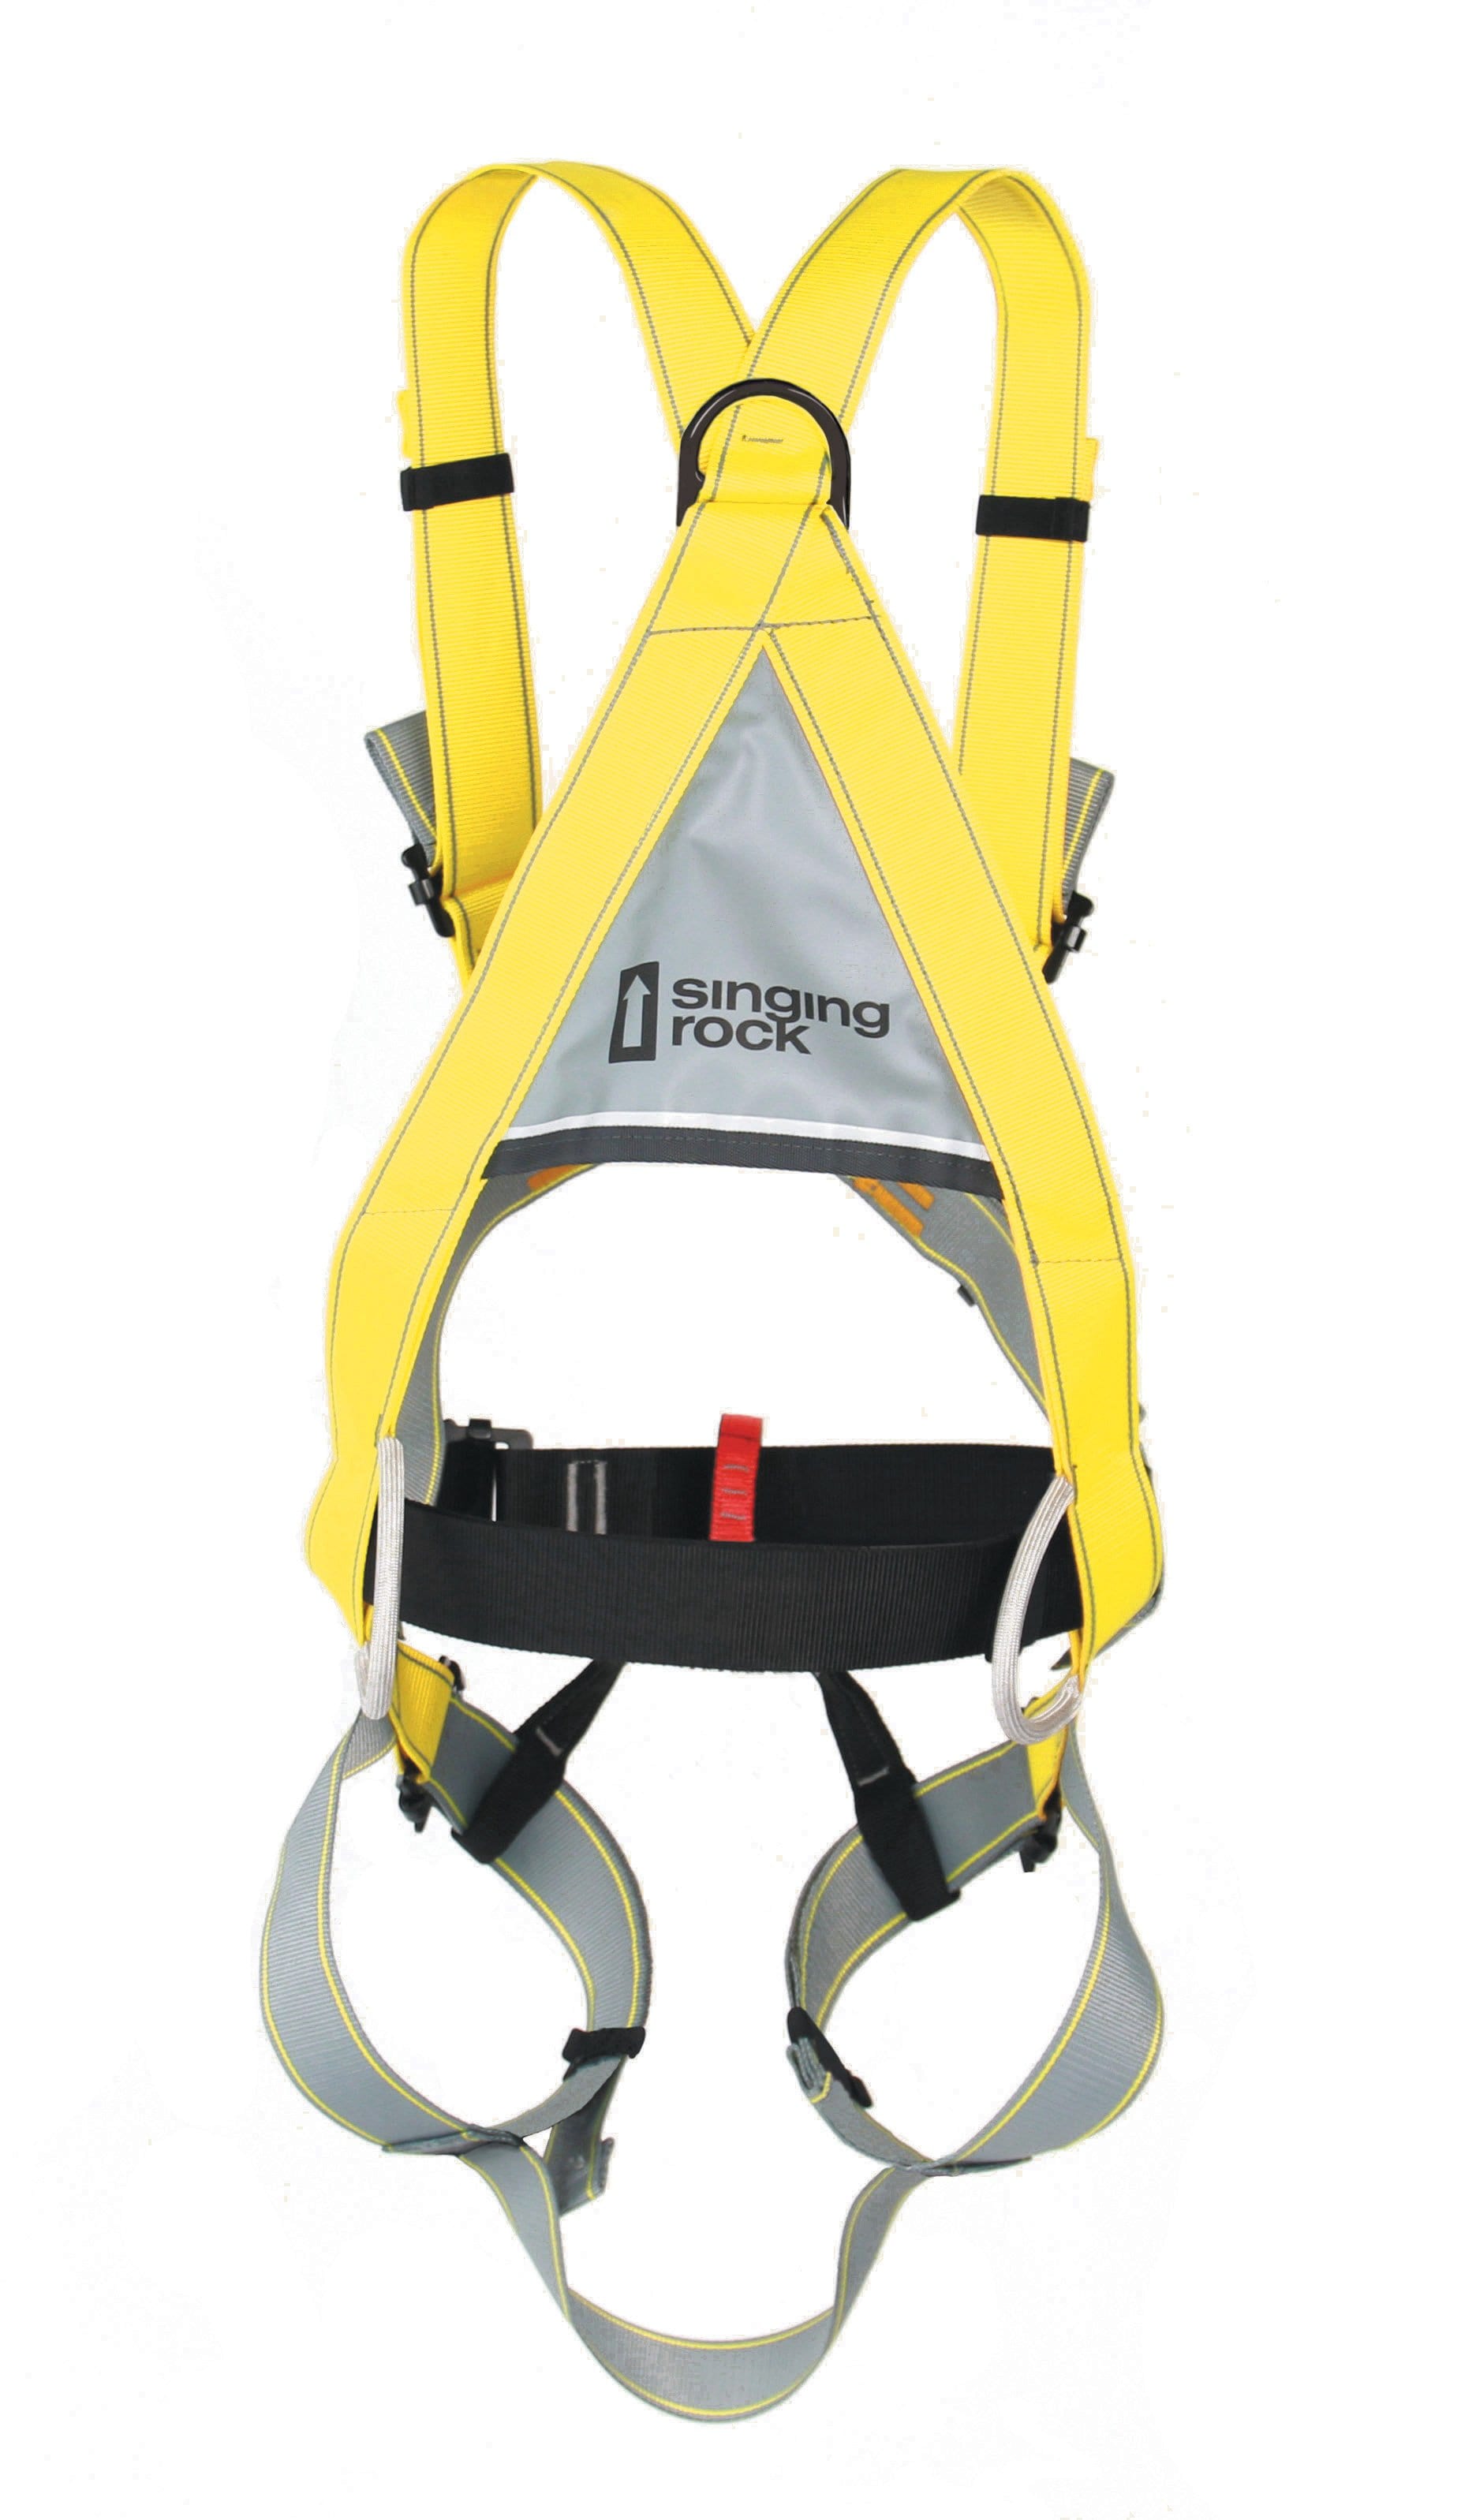 Singing Rock Ropedancer II Harness for Rope Courses